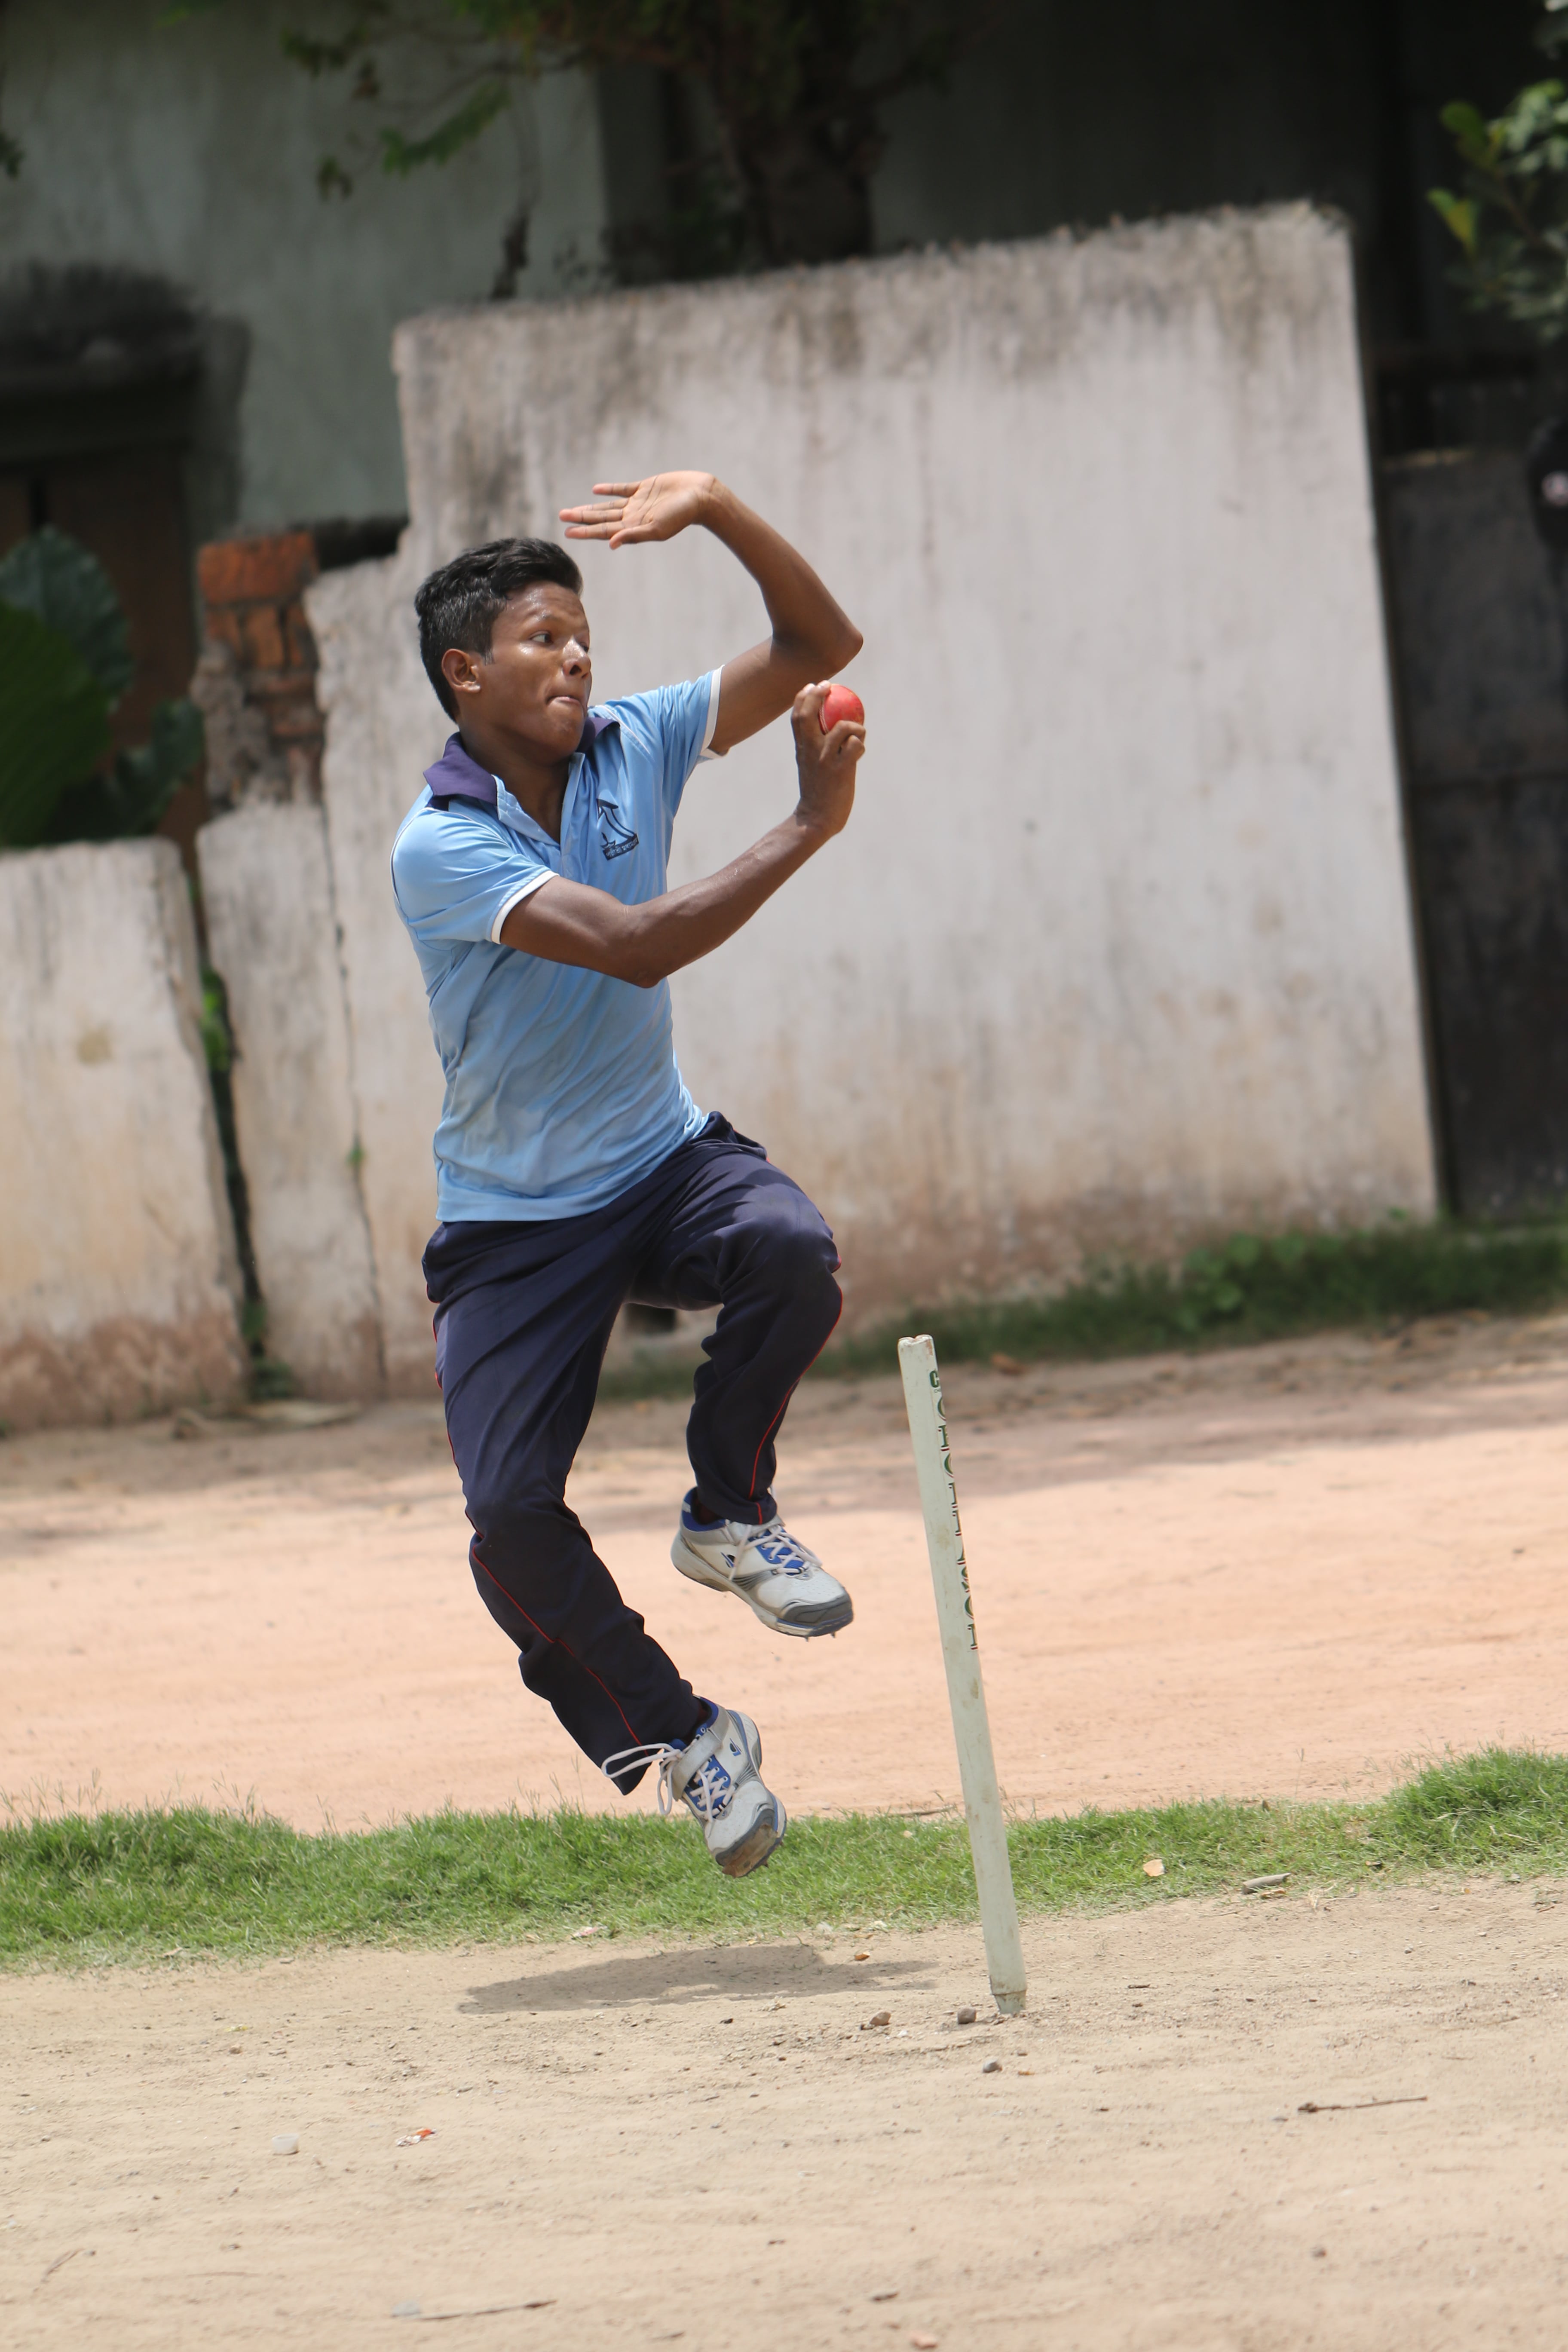 How to be a fast bowler